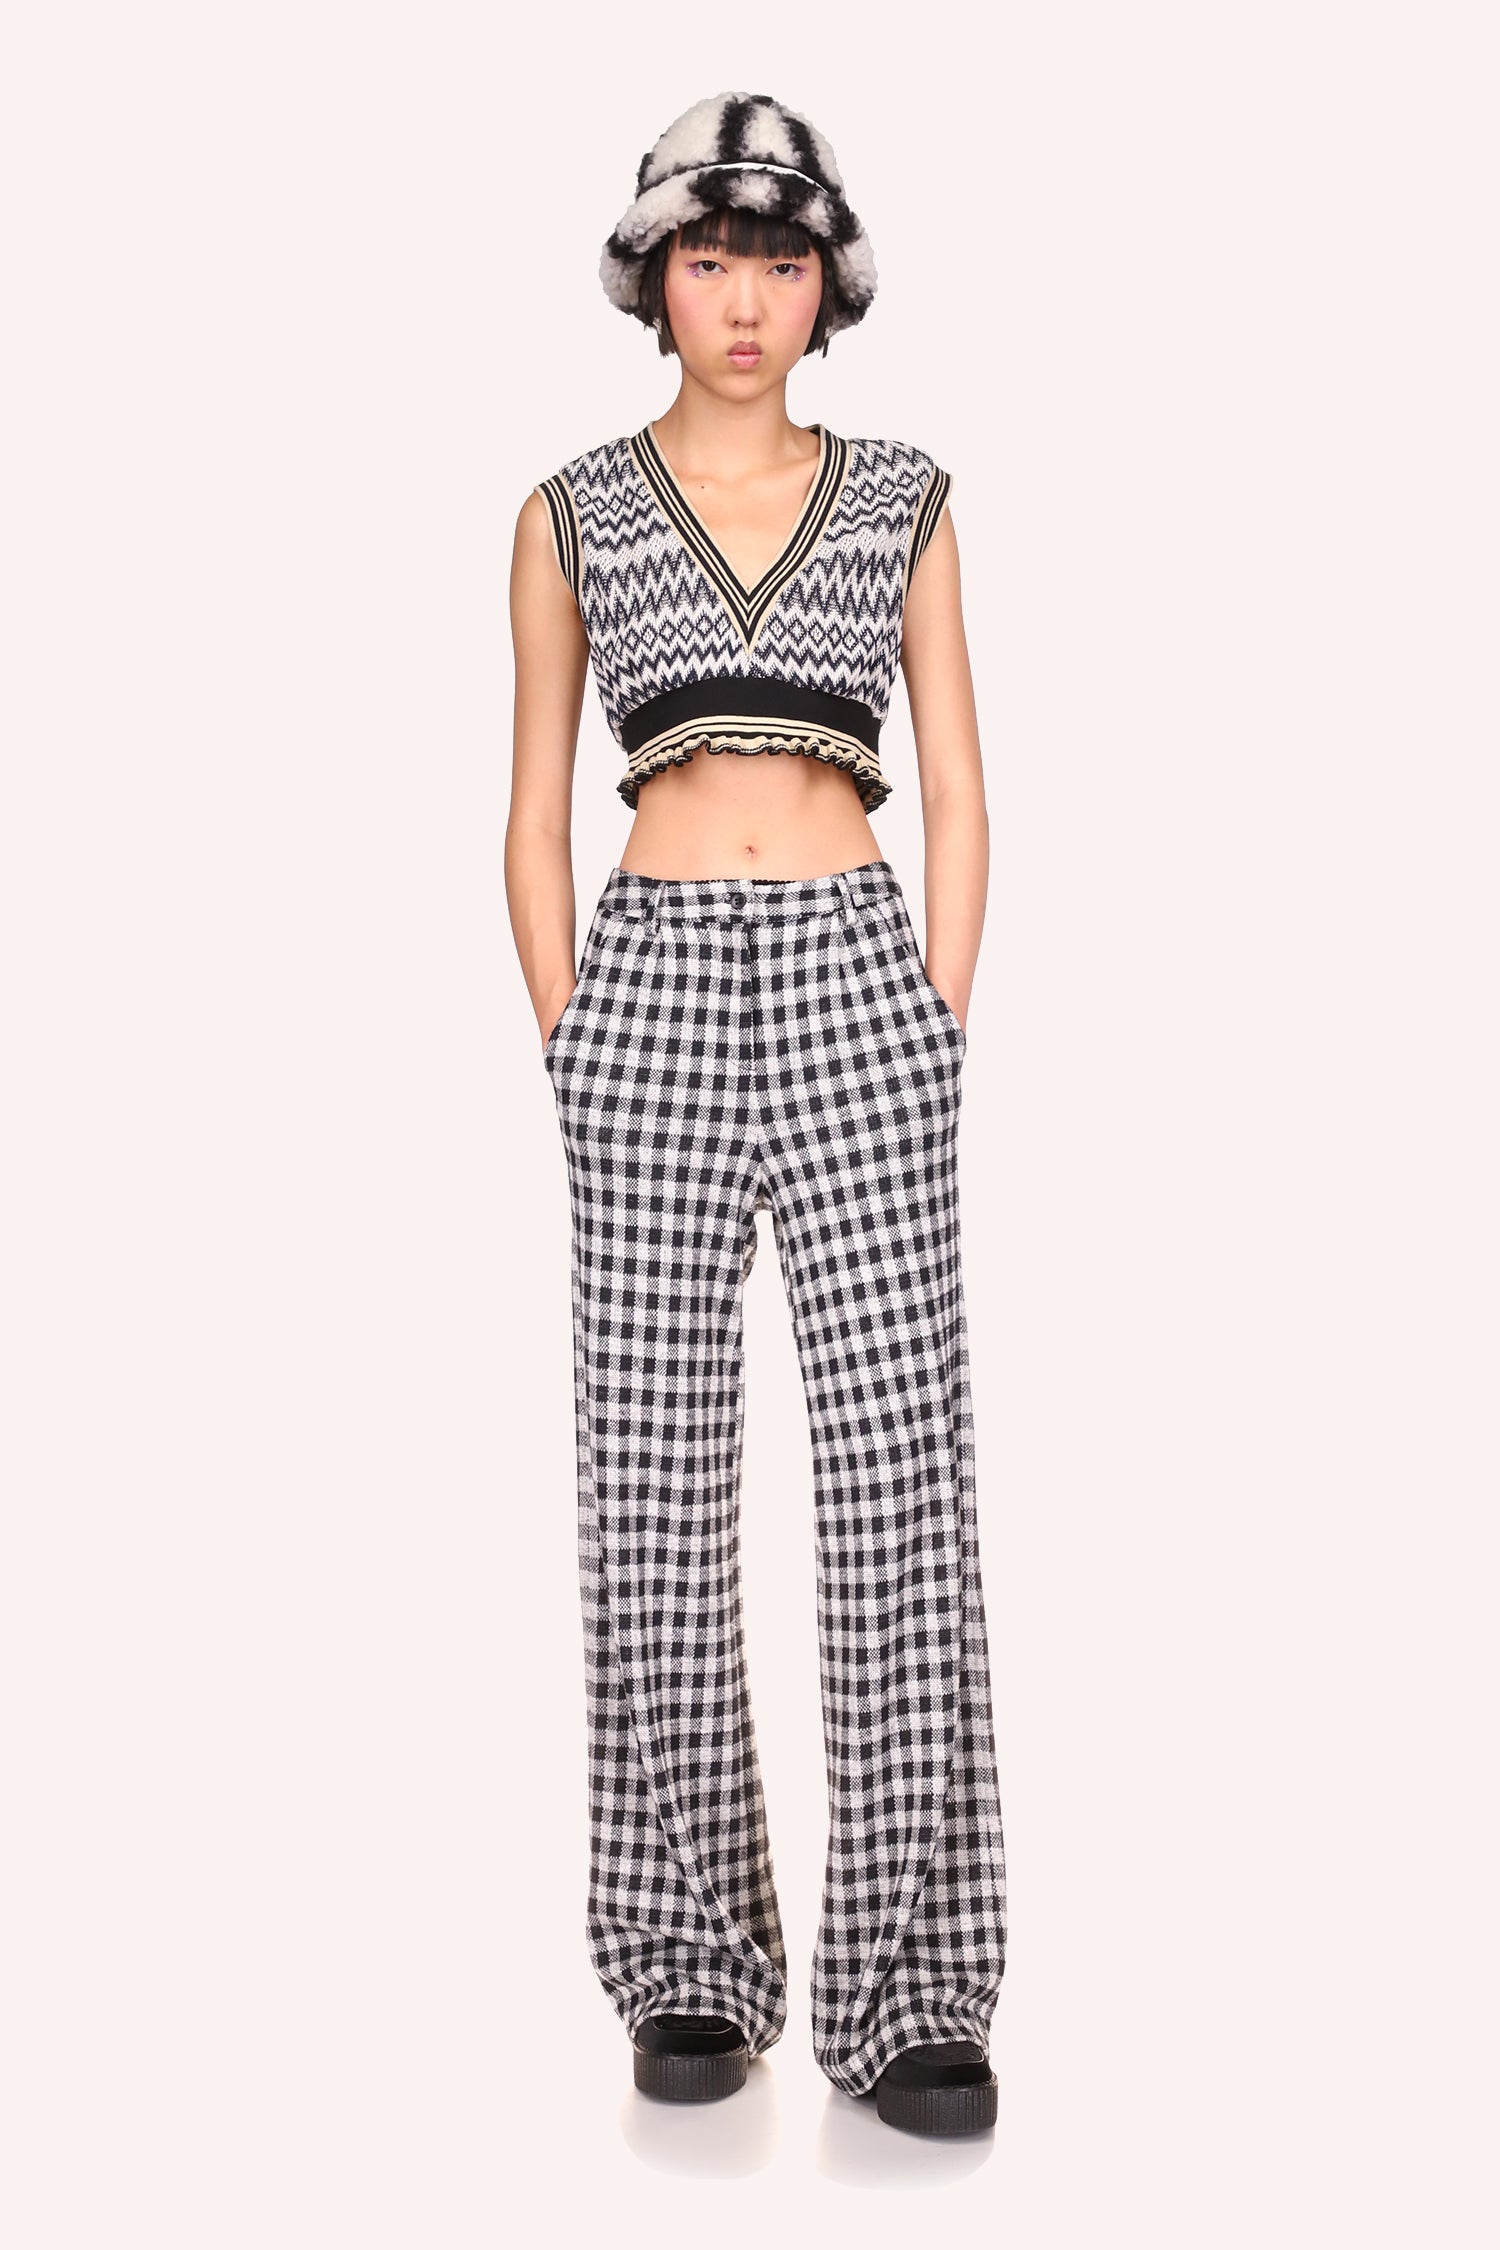 The black Zigzag patterned vest paired with the black Gingham checkered pants accentuate and enhance your curves